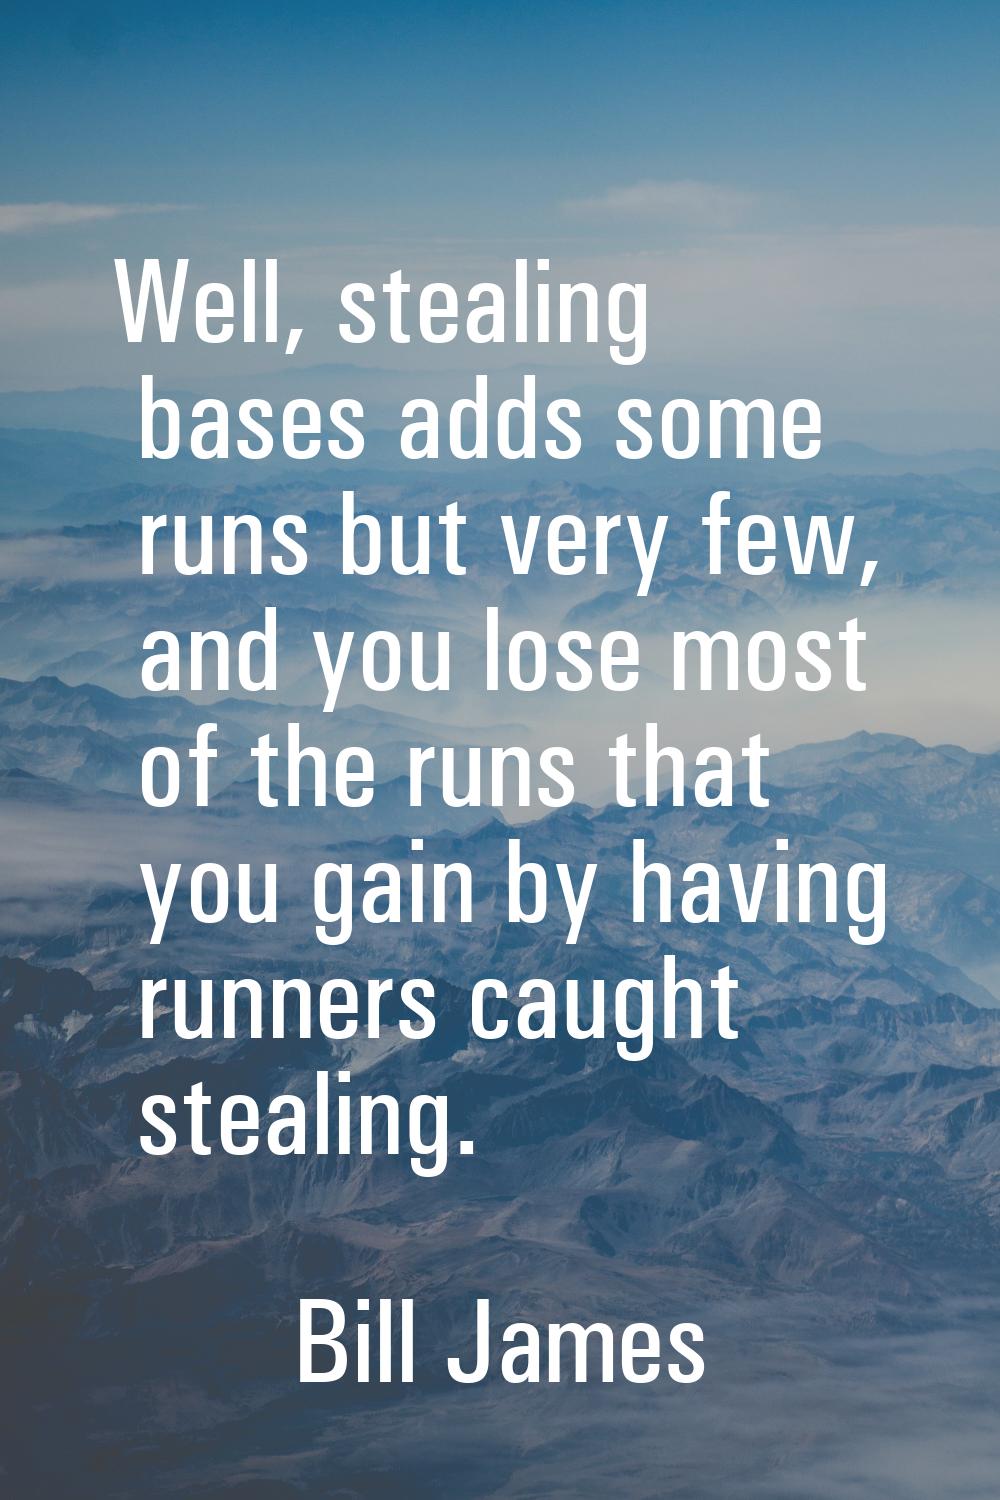 Well, stealing bases adds some runs but very few, and you lose most of the runs that you gain by ha